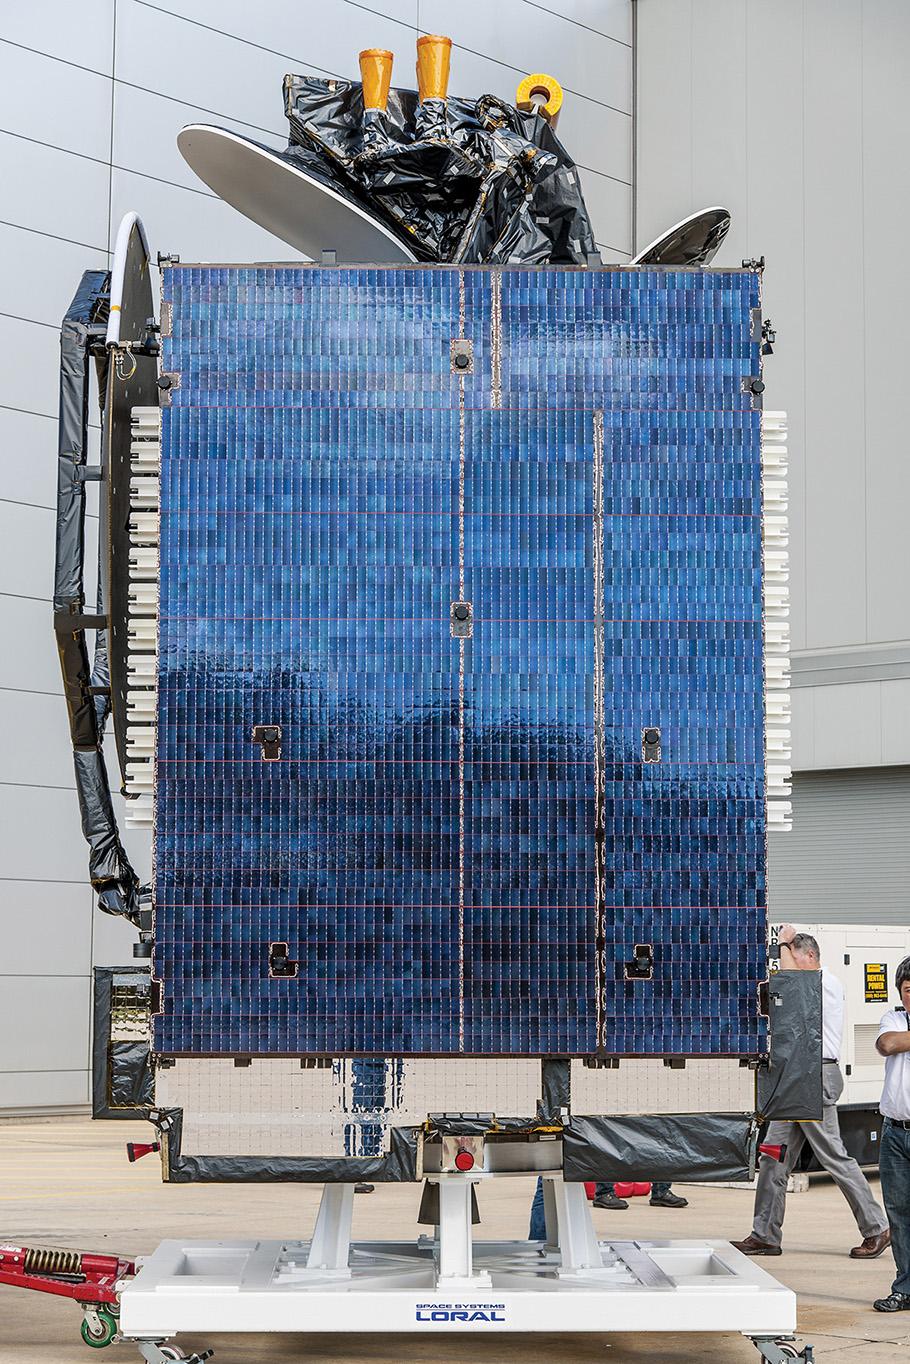 The satellite is shaped like a long rectangle, about three times as tall as an adult man and covered in glass tiles 